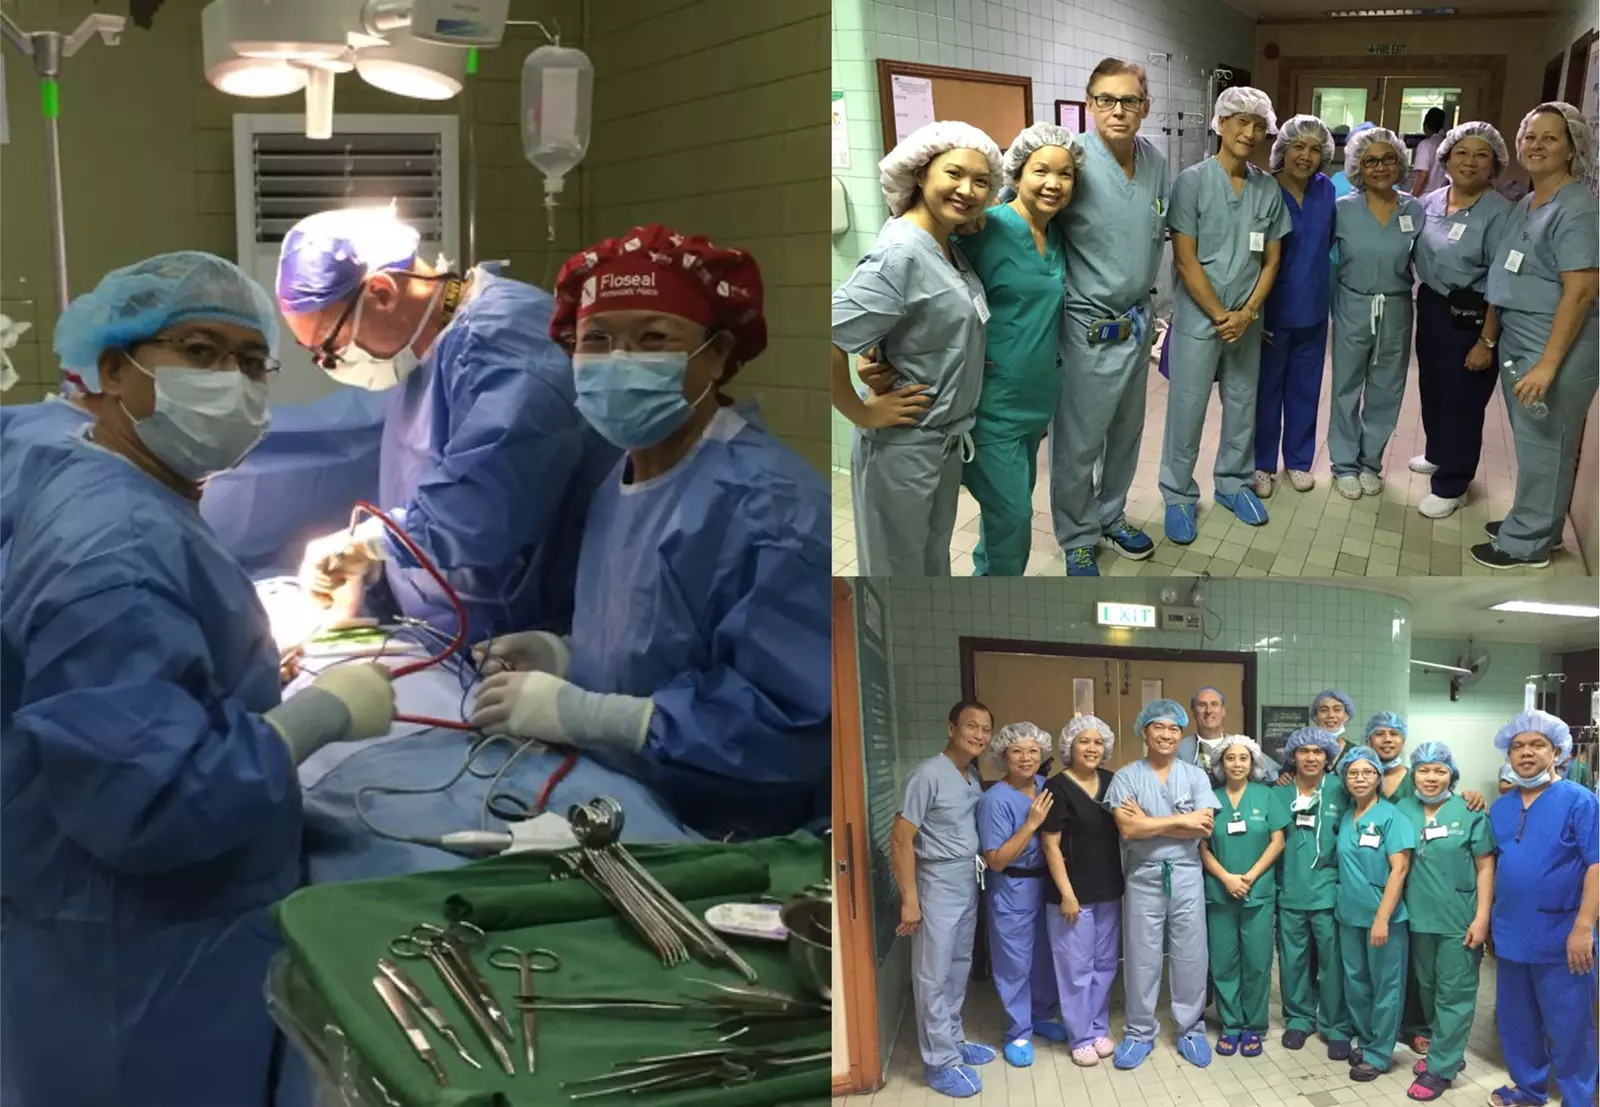 Clinical photos of Evelyn and other nurses working in the Phillippines